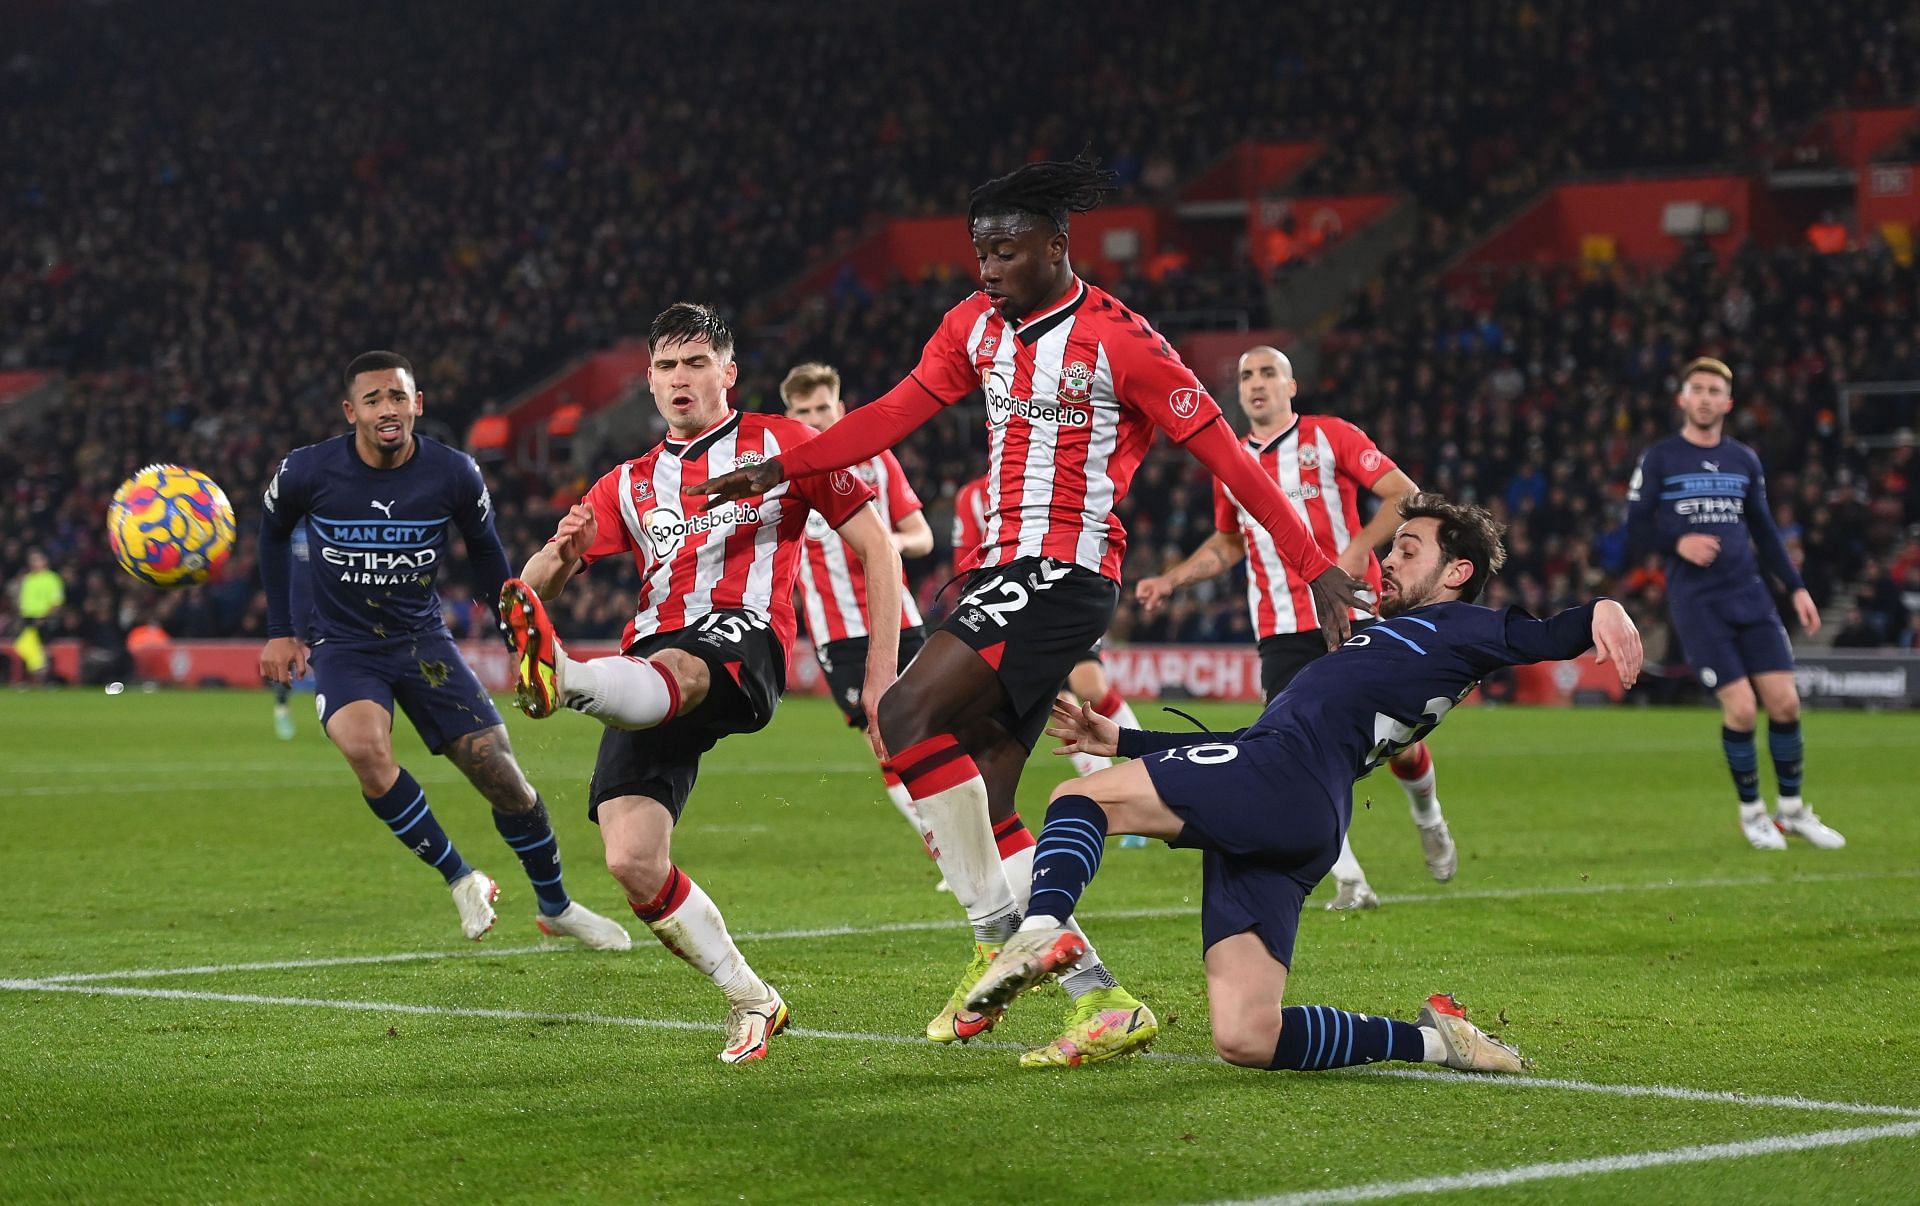 Southampton held Manchester City to a 1-1 draw in the Premier League on Saturday.